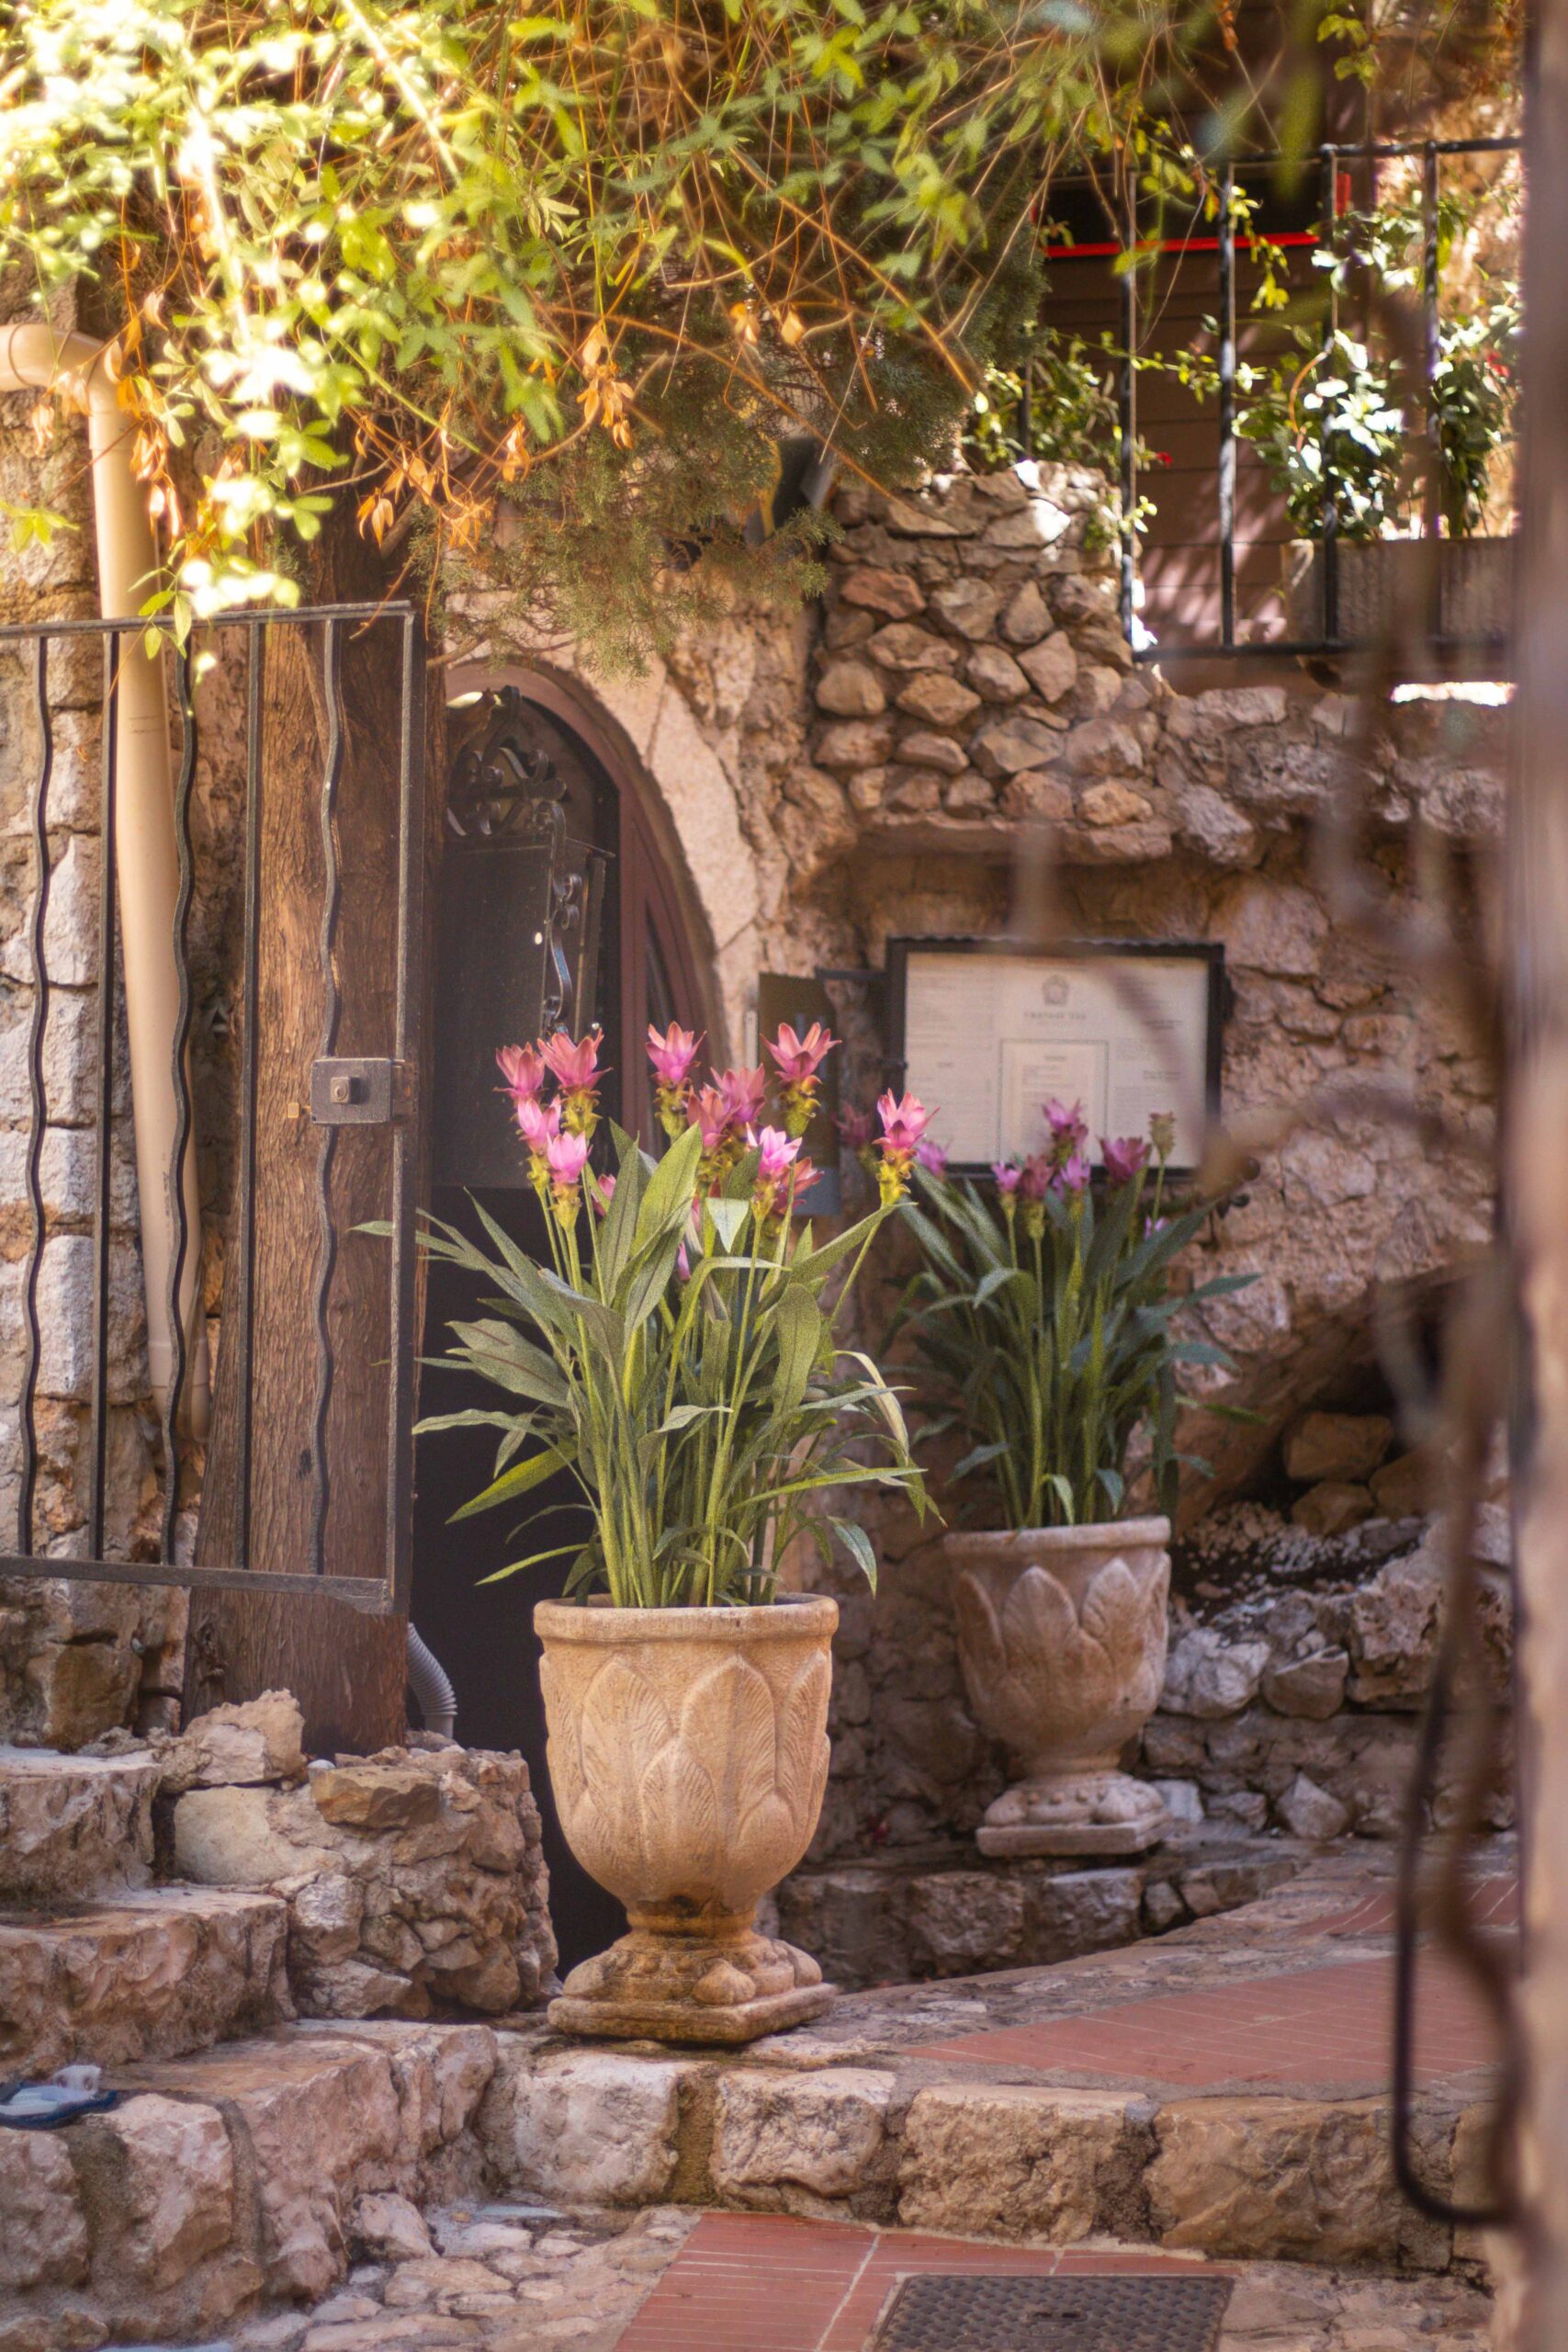 Details of a small empty cobblestone street featuring potted plants and flowers in Eze Village, France